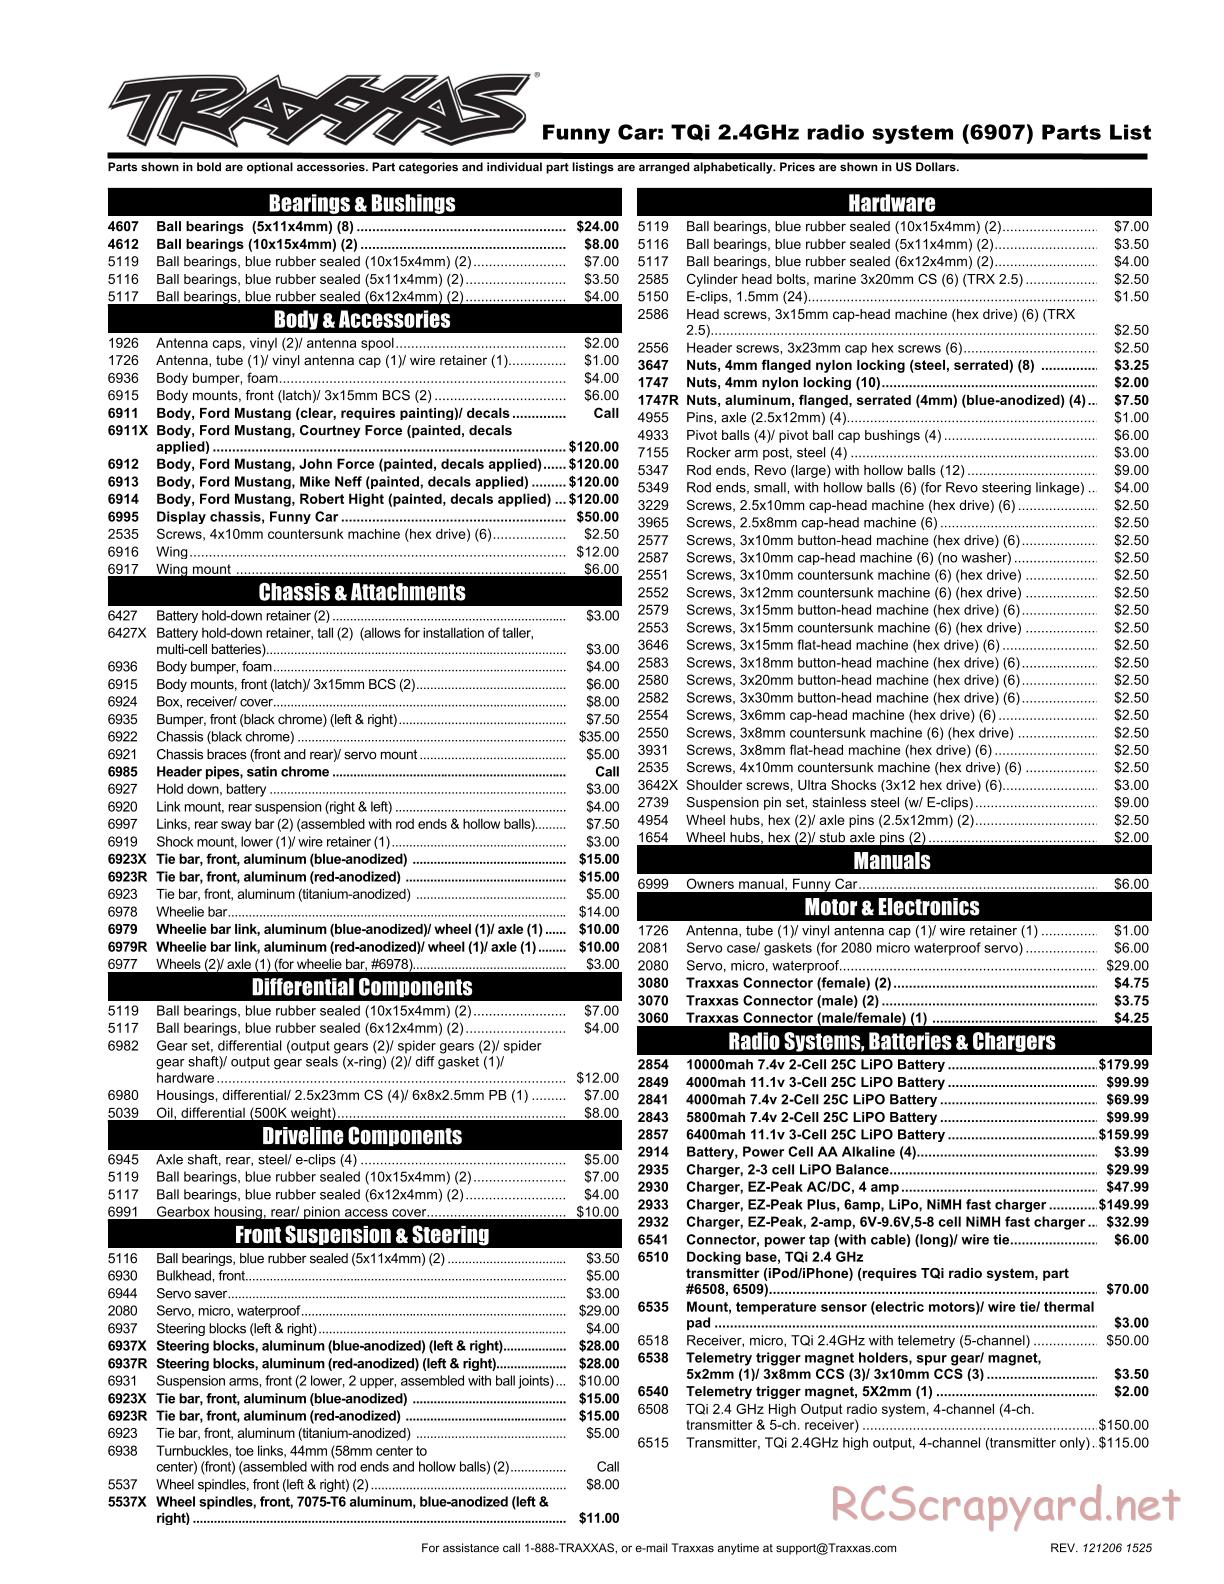 Traxxas - Funny Car (2012) - Parts List - Page 1